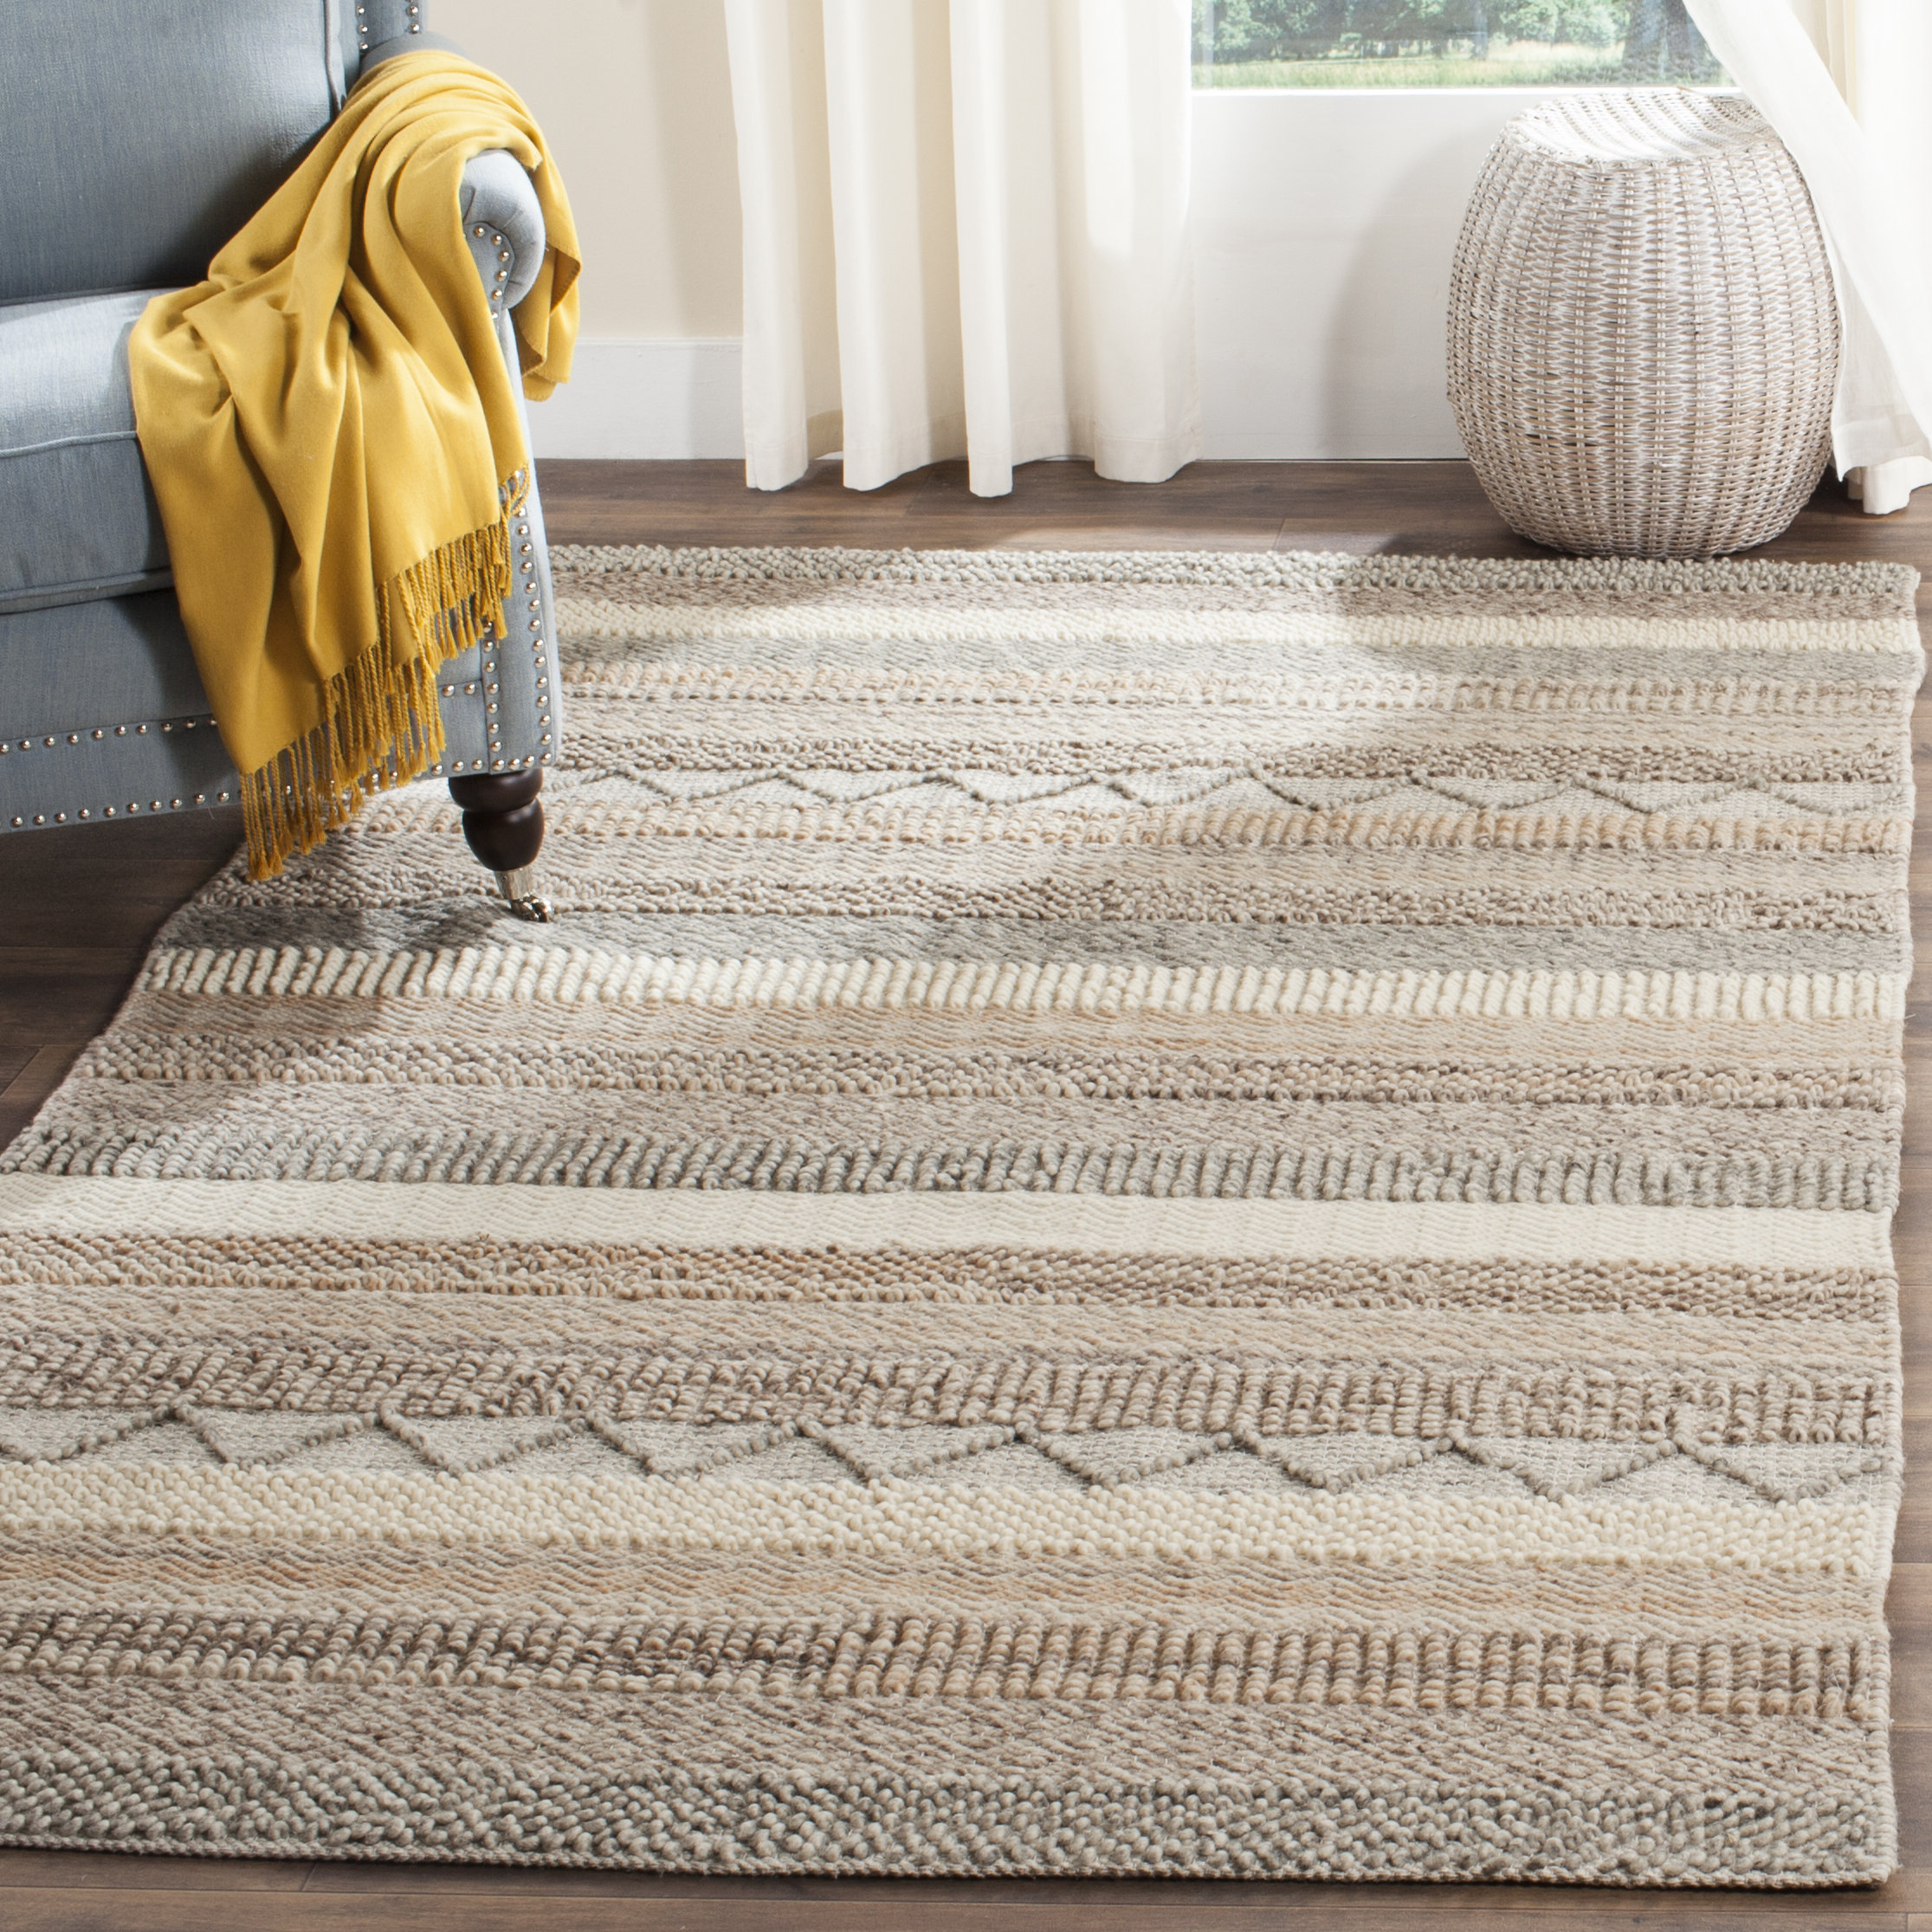 Wayfair | 10' x 14' Ivory & Cream Area Rugs You'll Love in 2022